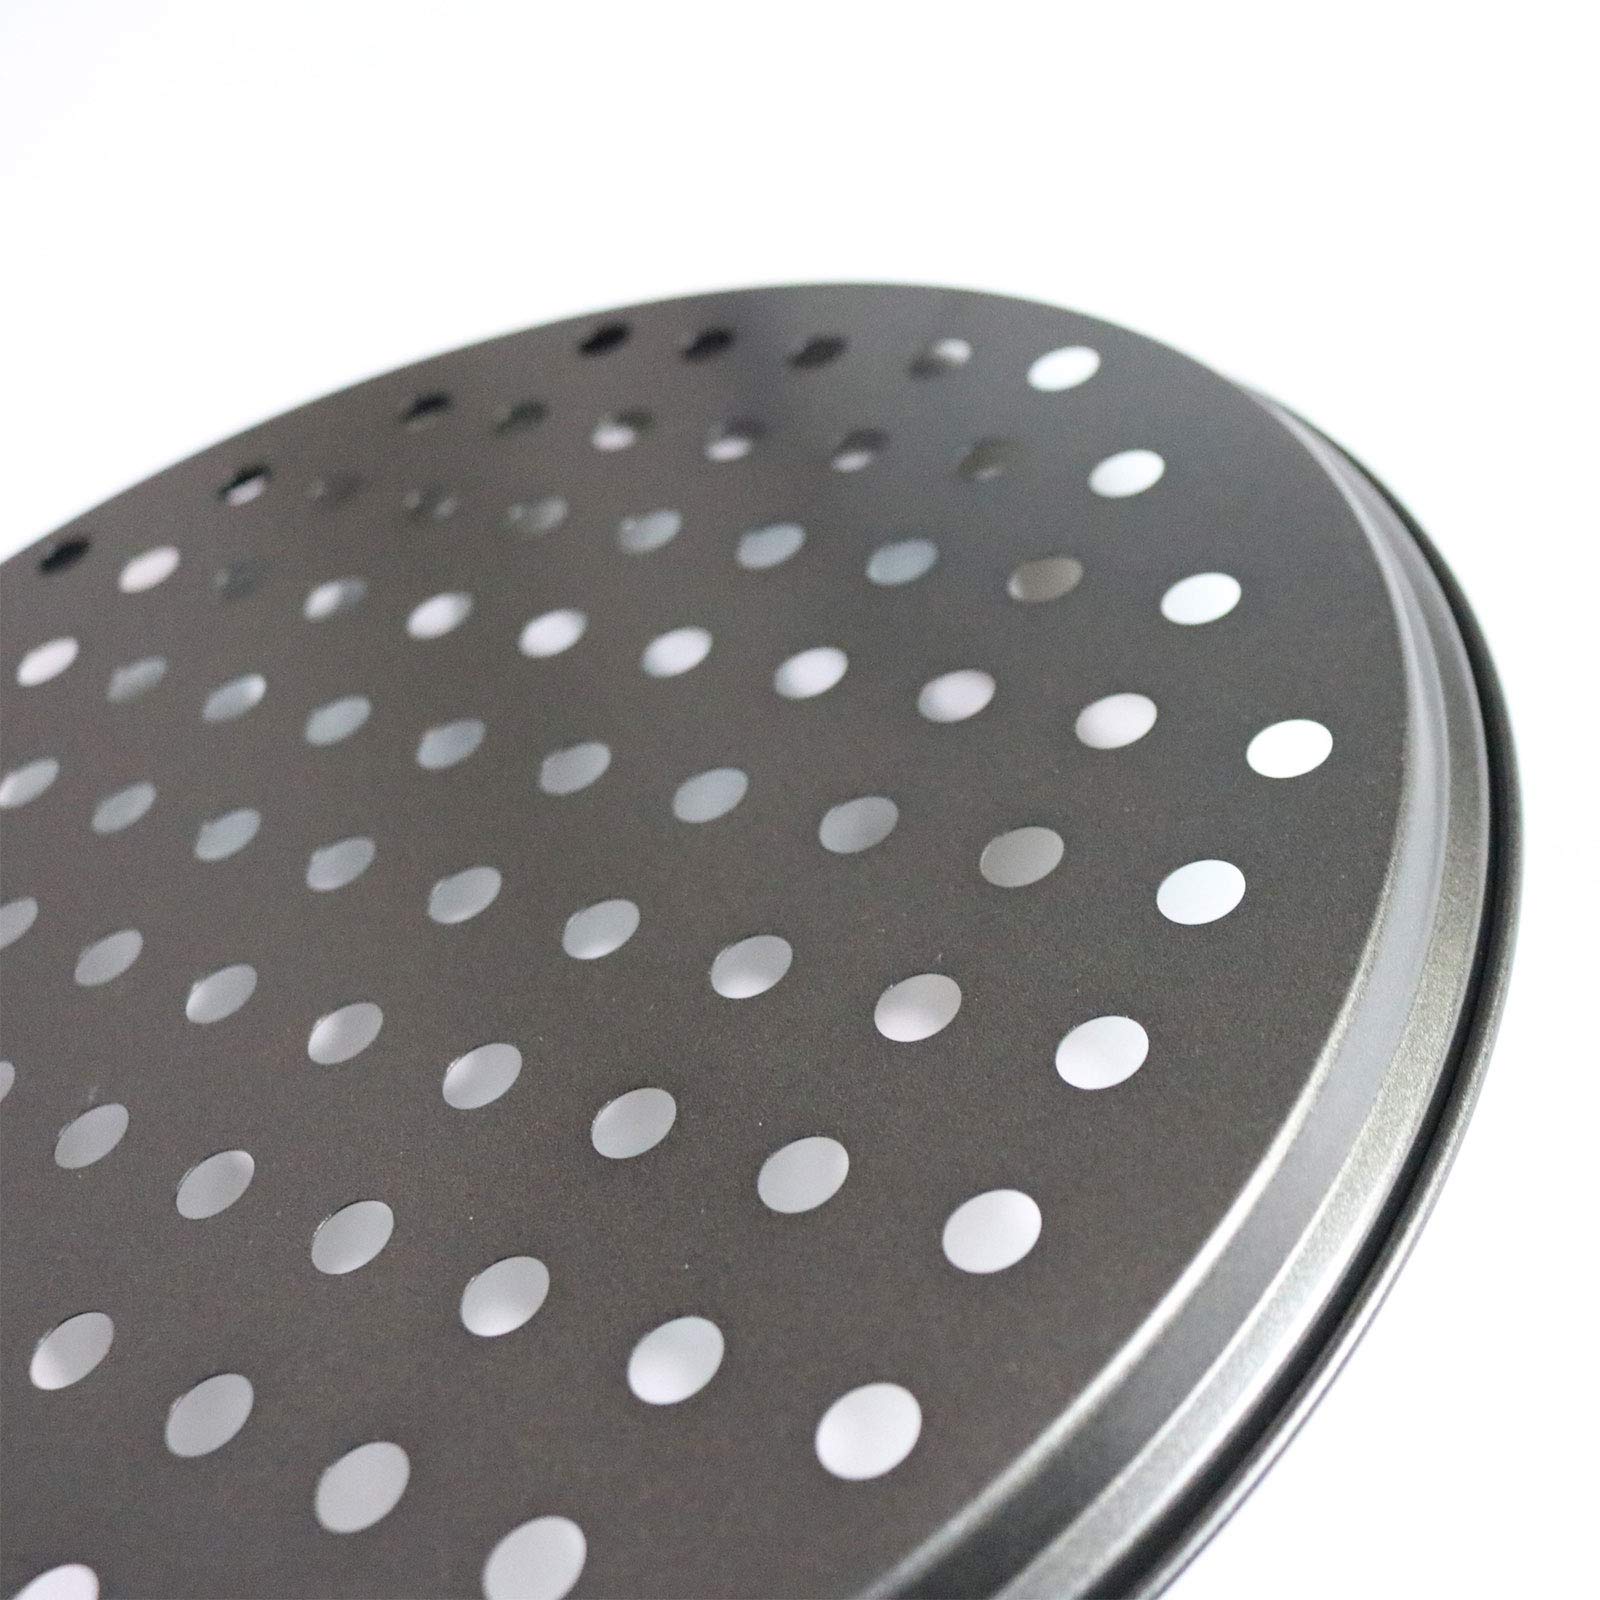 Pizza Pan for Oven, 12 inch Nonstick Pizza Pans, Carbon Steel Pizza Pan with Holes, Pizza Baking Pan for Oven Baking Supplies, for Home Baking Kitchen Oven Restaurant